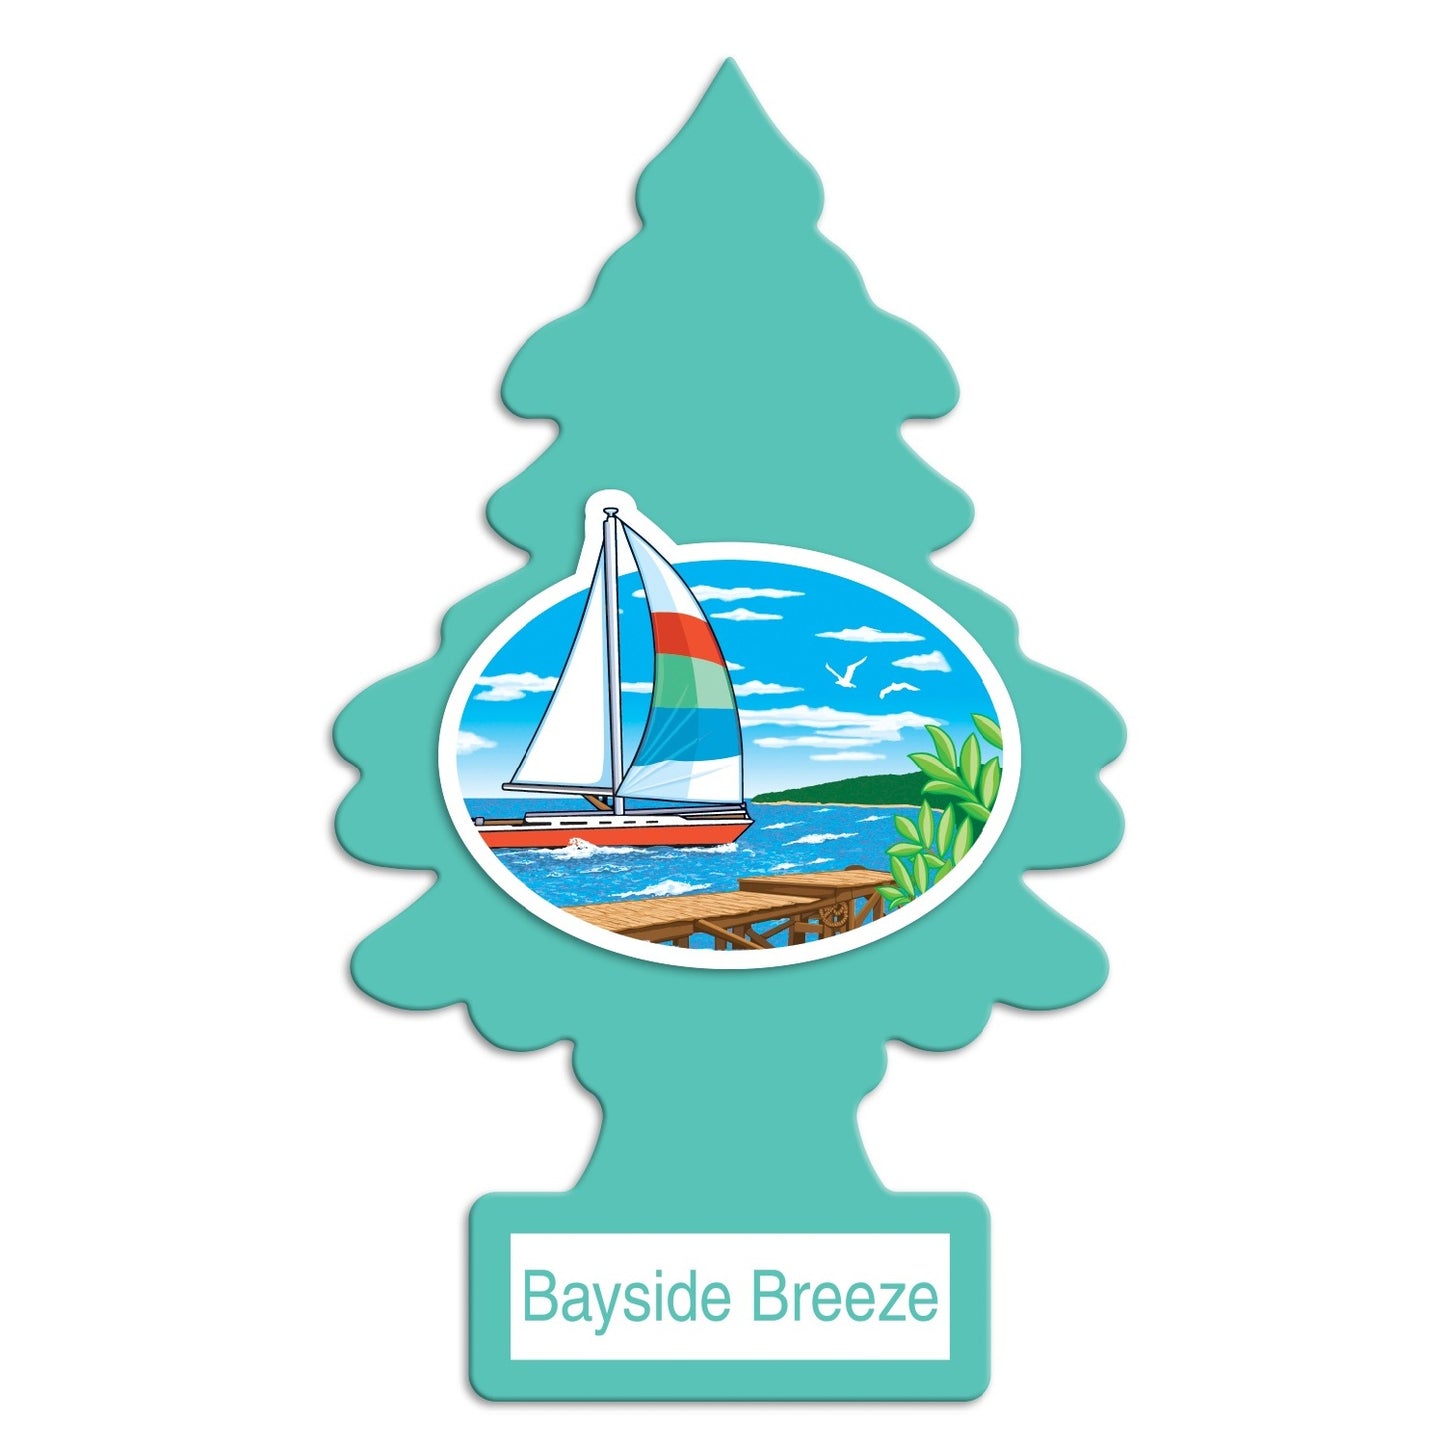 Little Trees Car Air Freshener - Bayside Breeze - 3 pieces